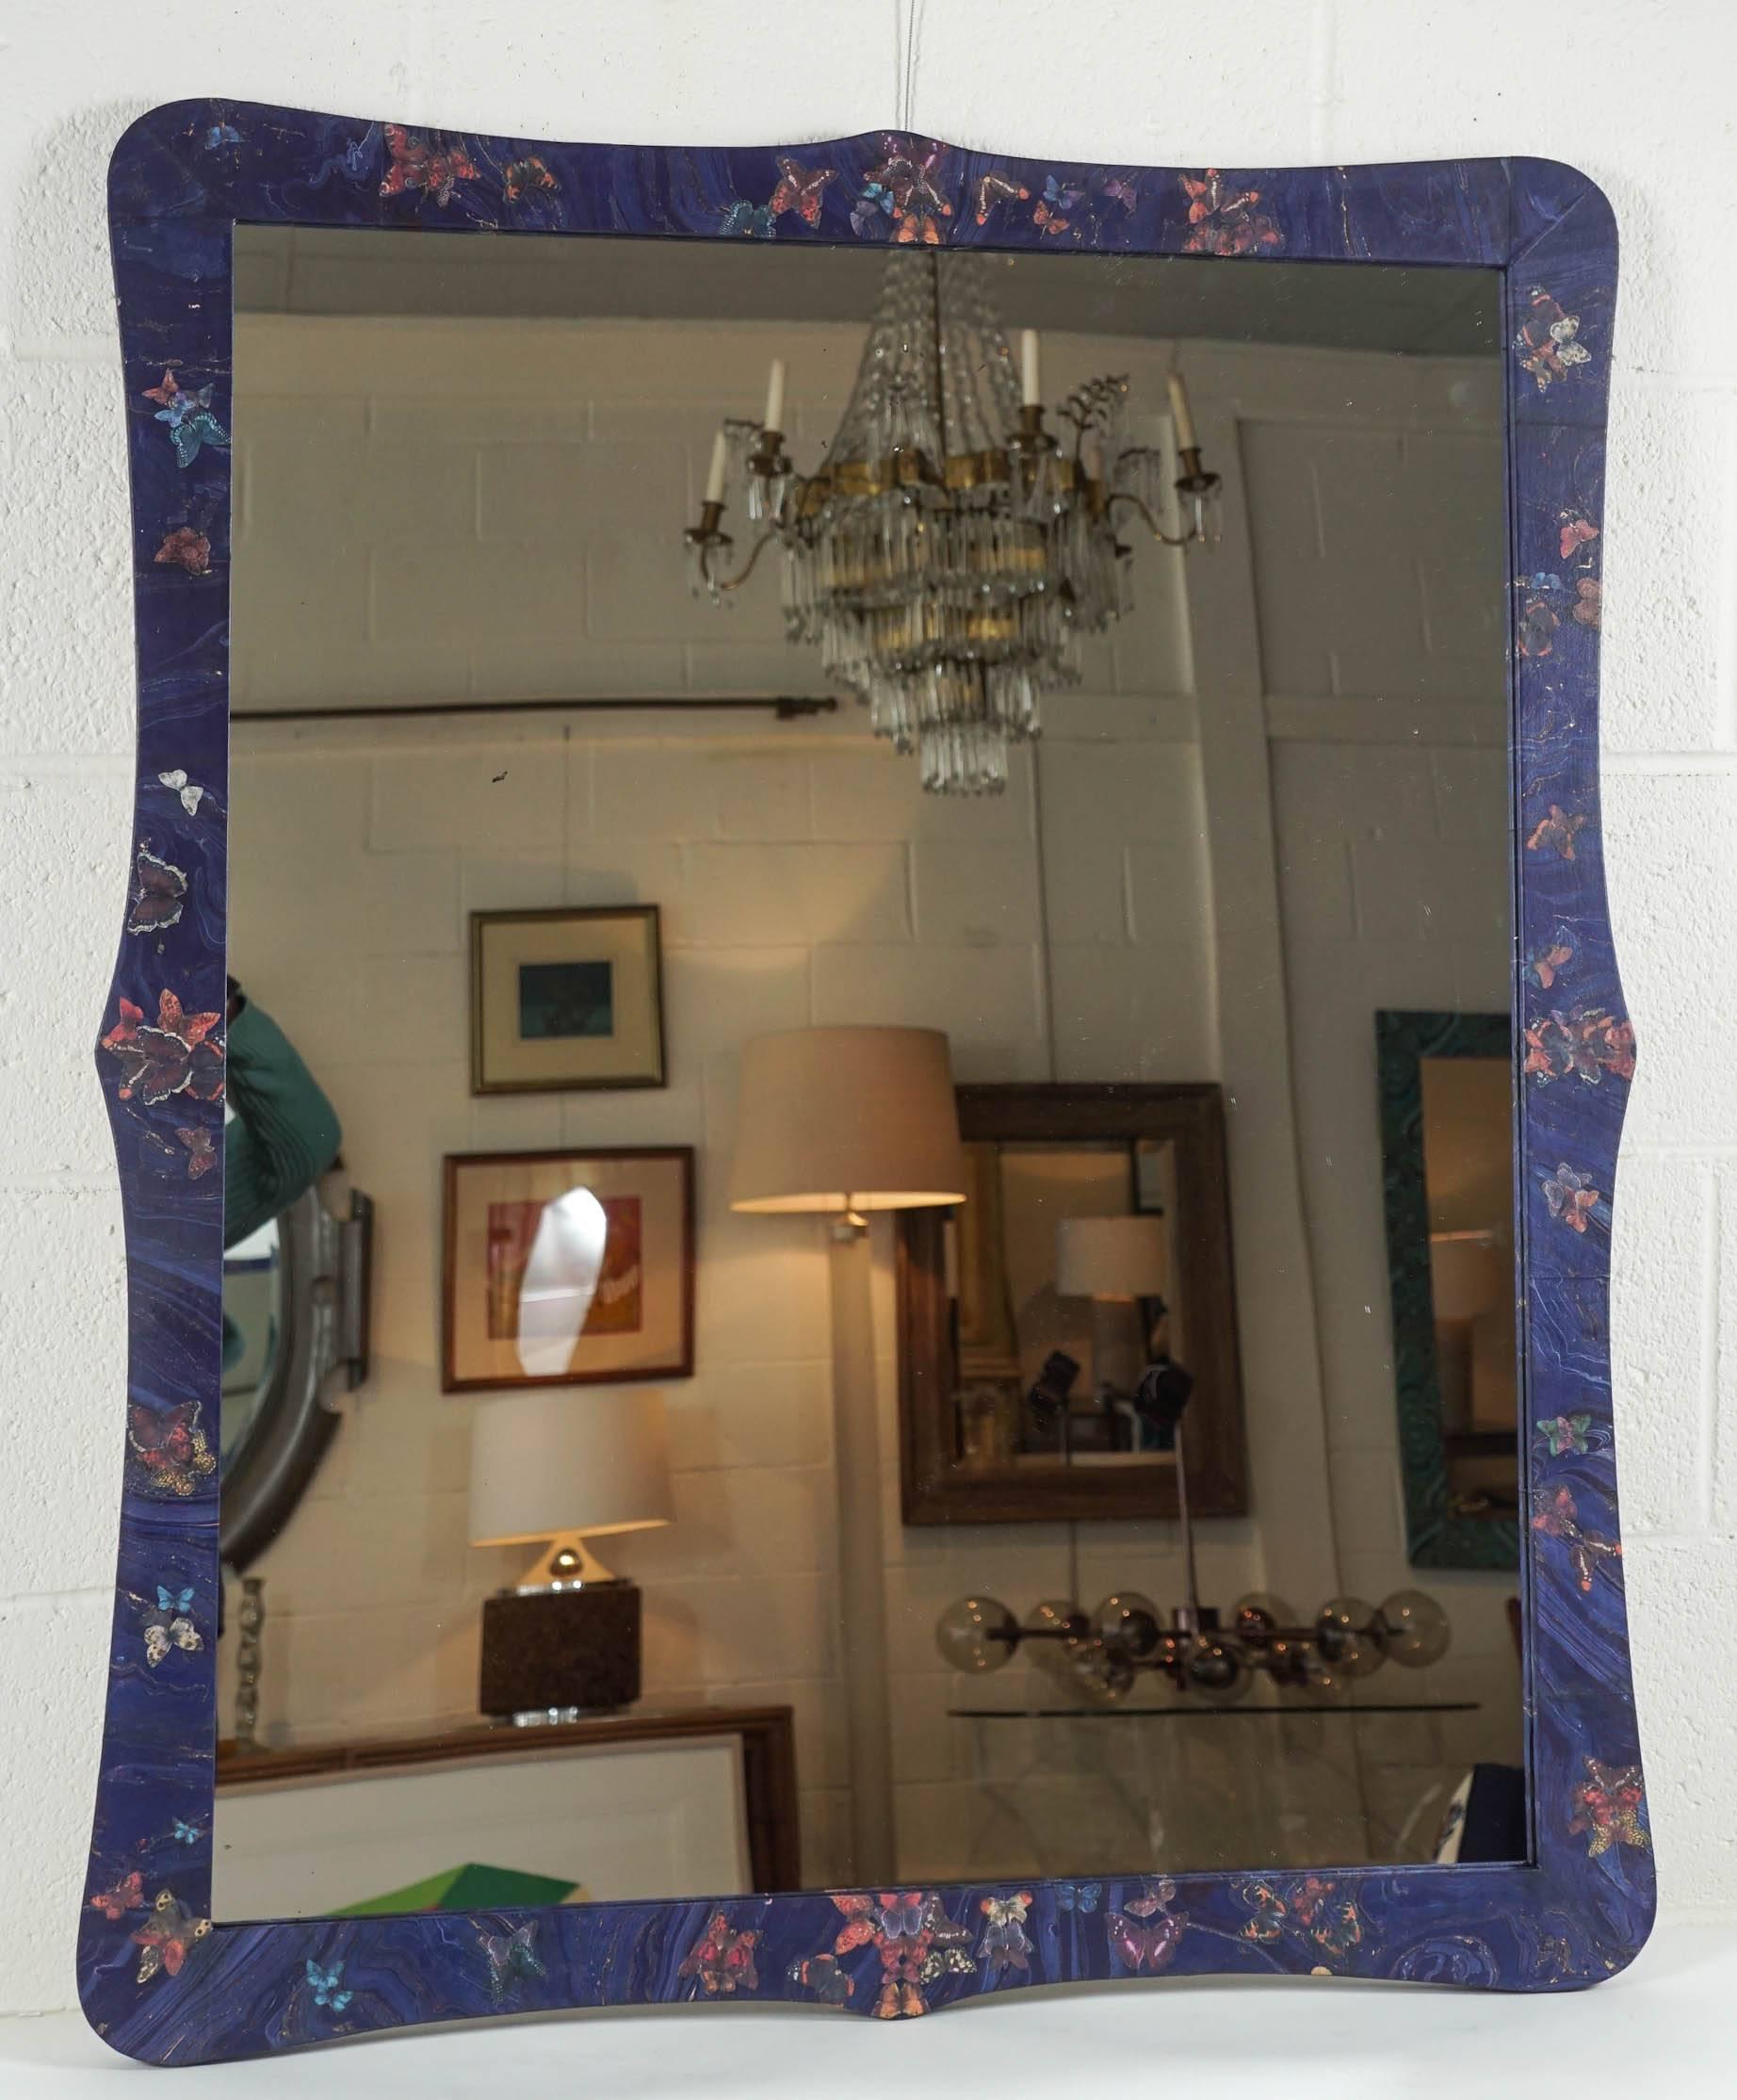 Here is a beautiful mirror decoupaged with a cobalt blue marbleized paper with gold striations and cut-out butterflies. The butterflies flutter across the surface and have abstracted Formations throughout.